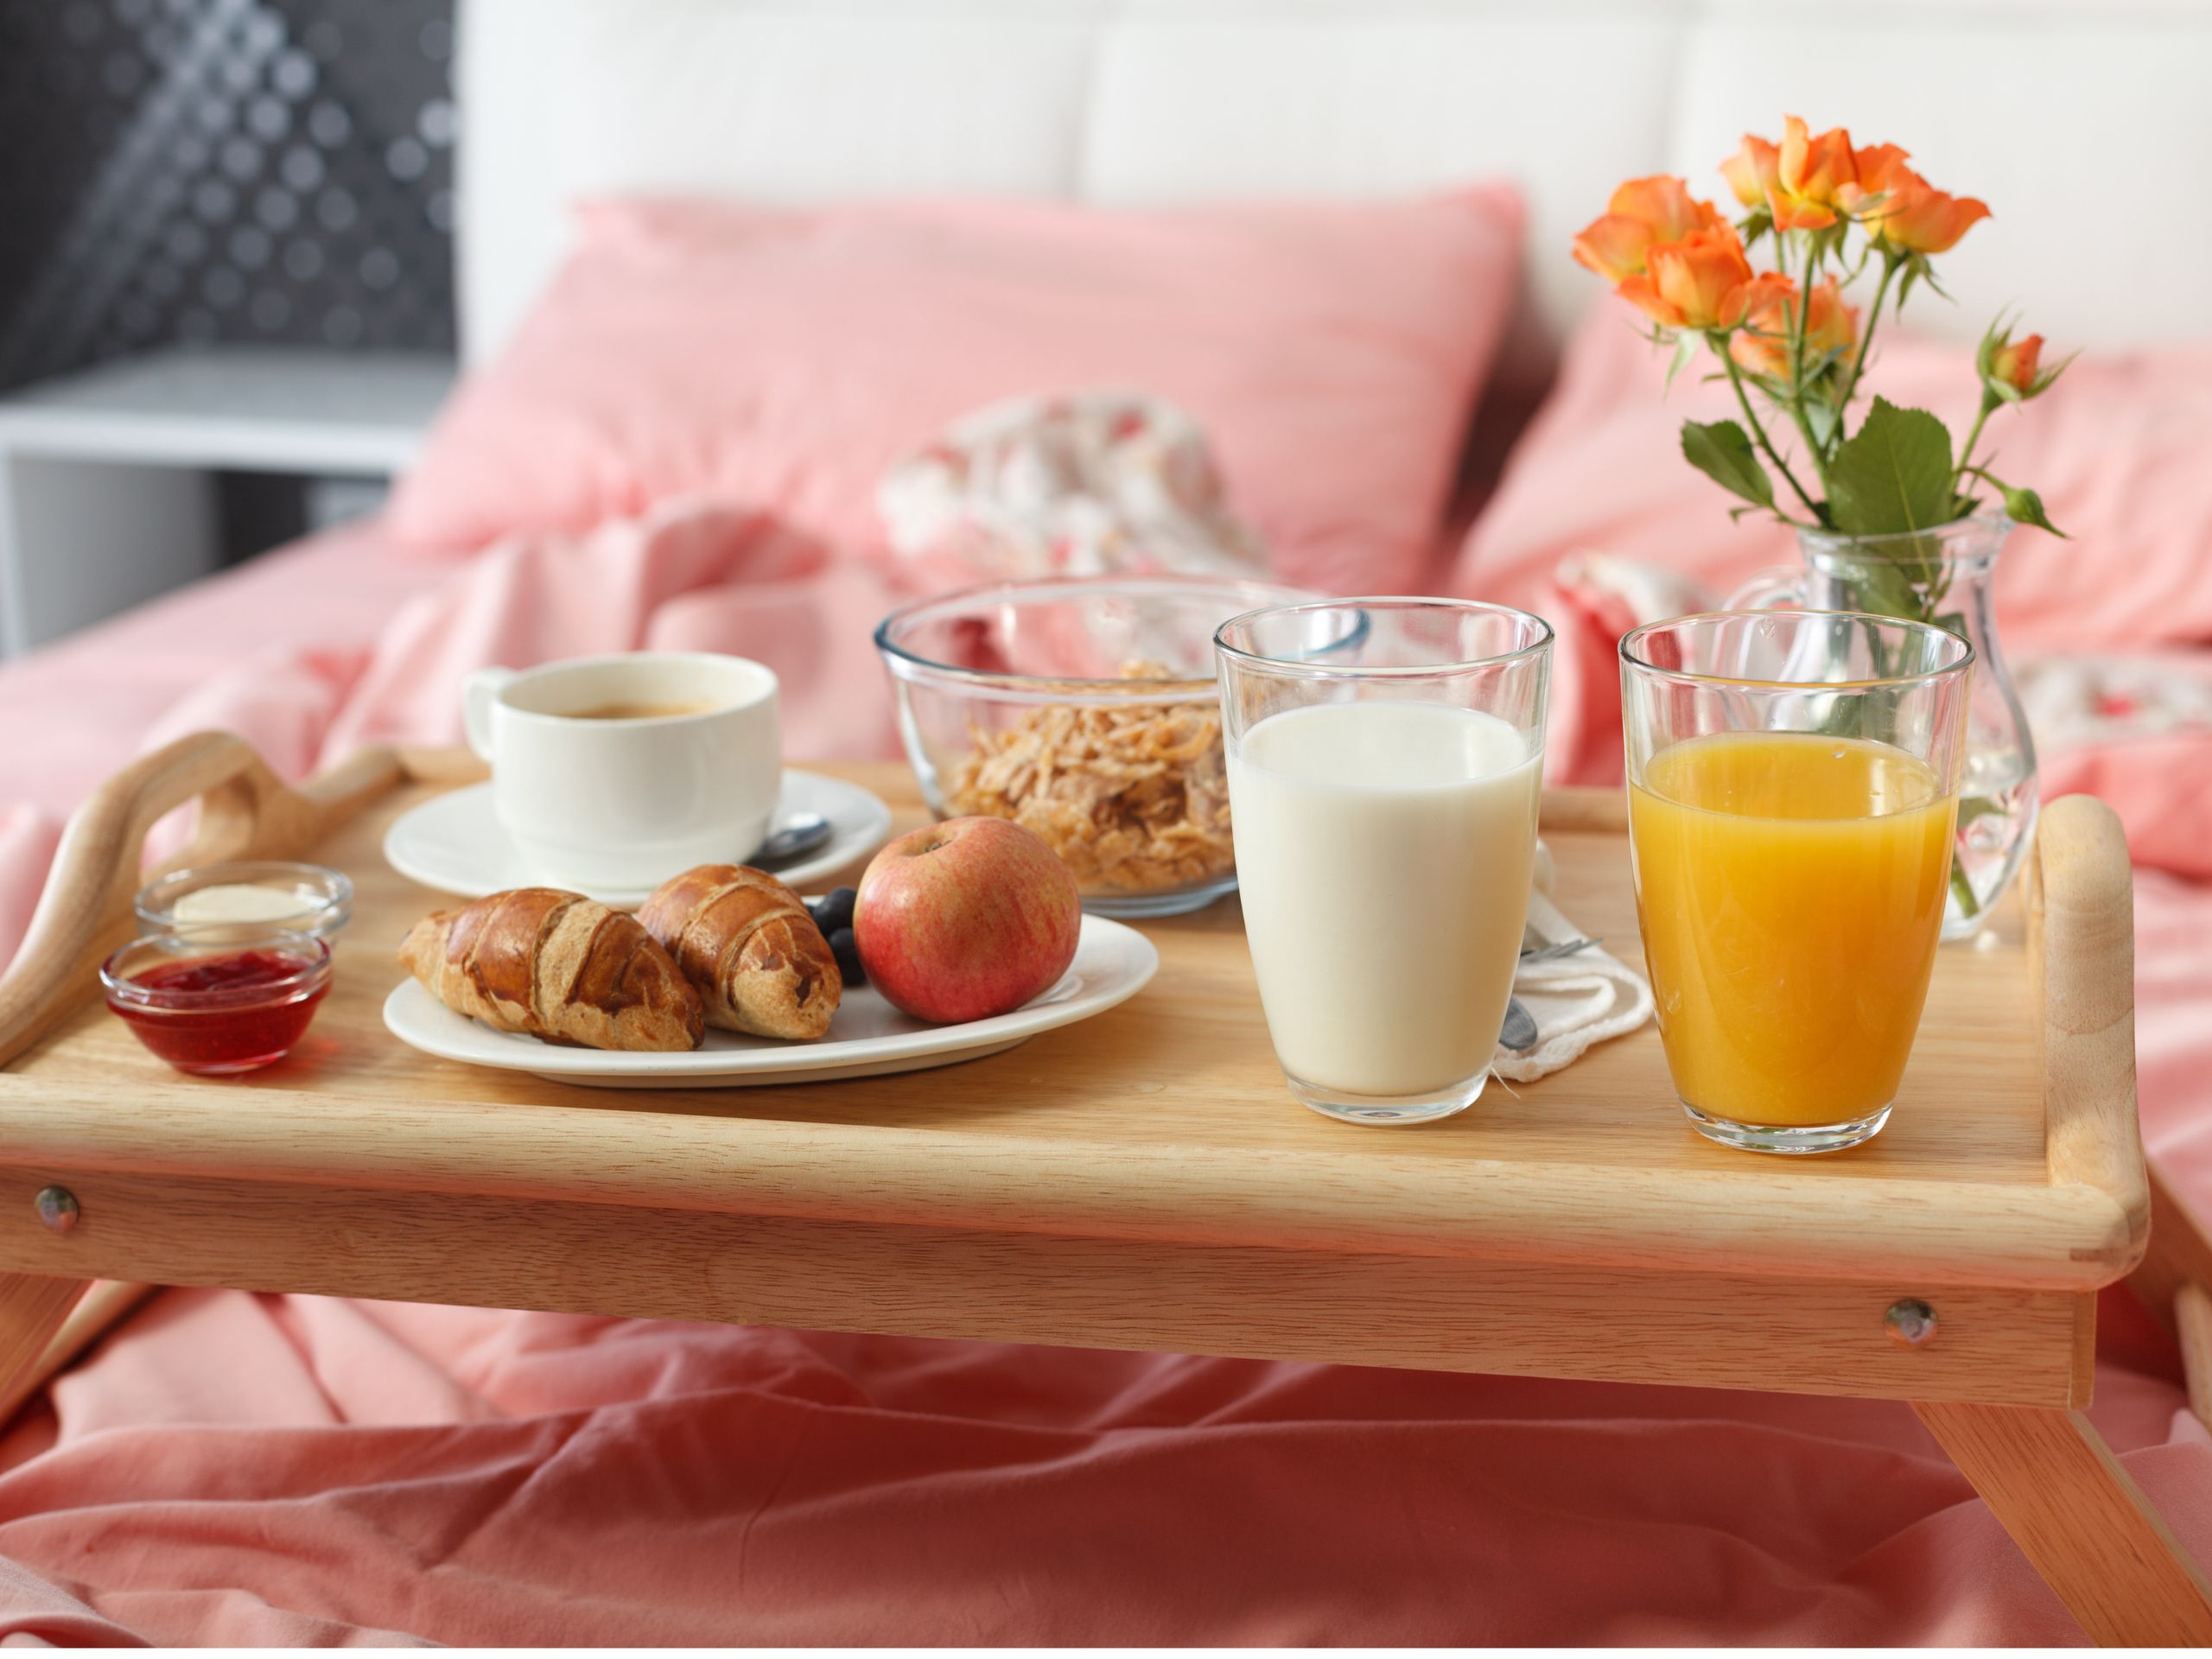 Breakfast in bed is great DIY way to make Mum's day